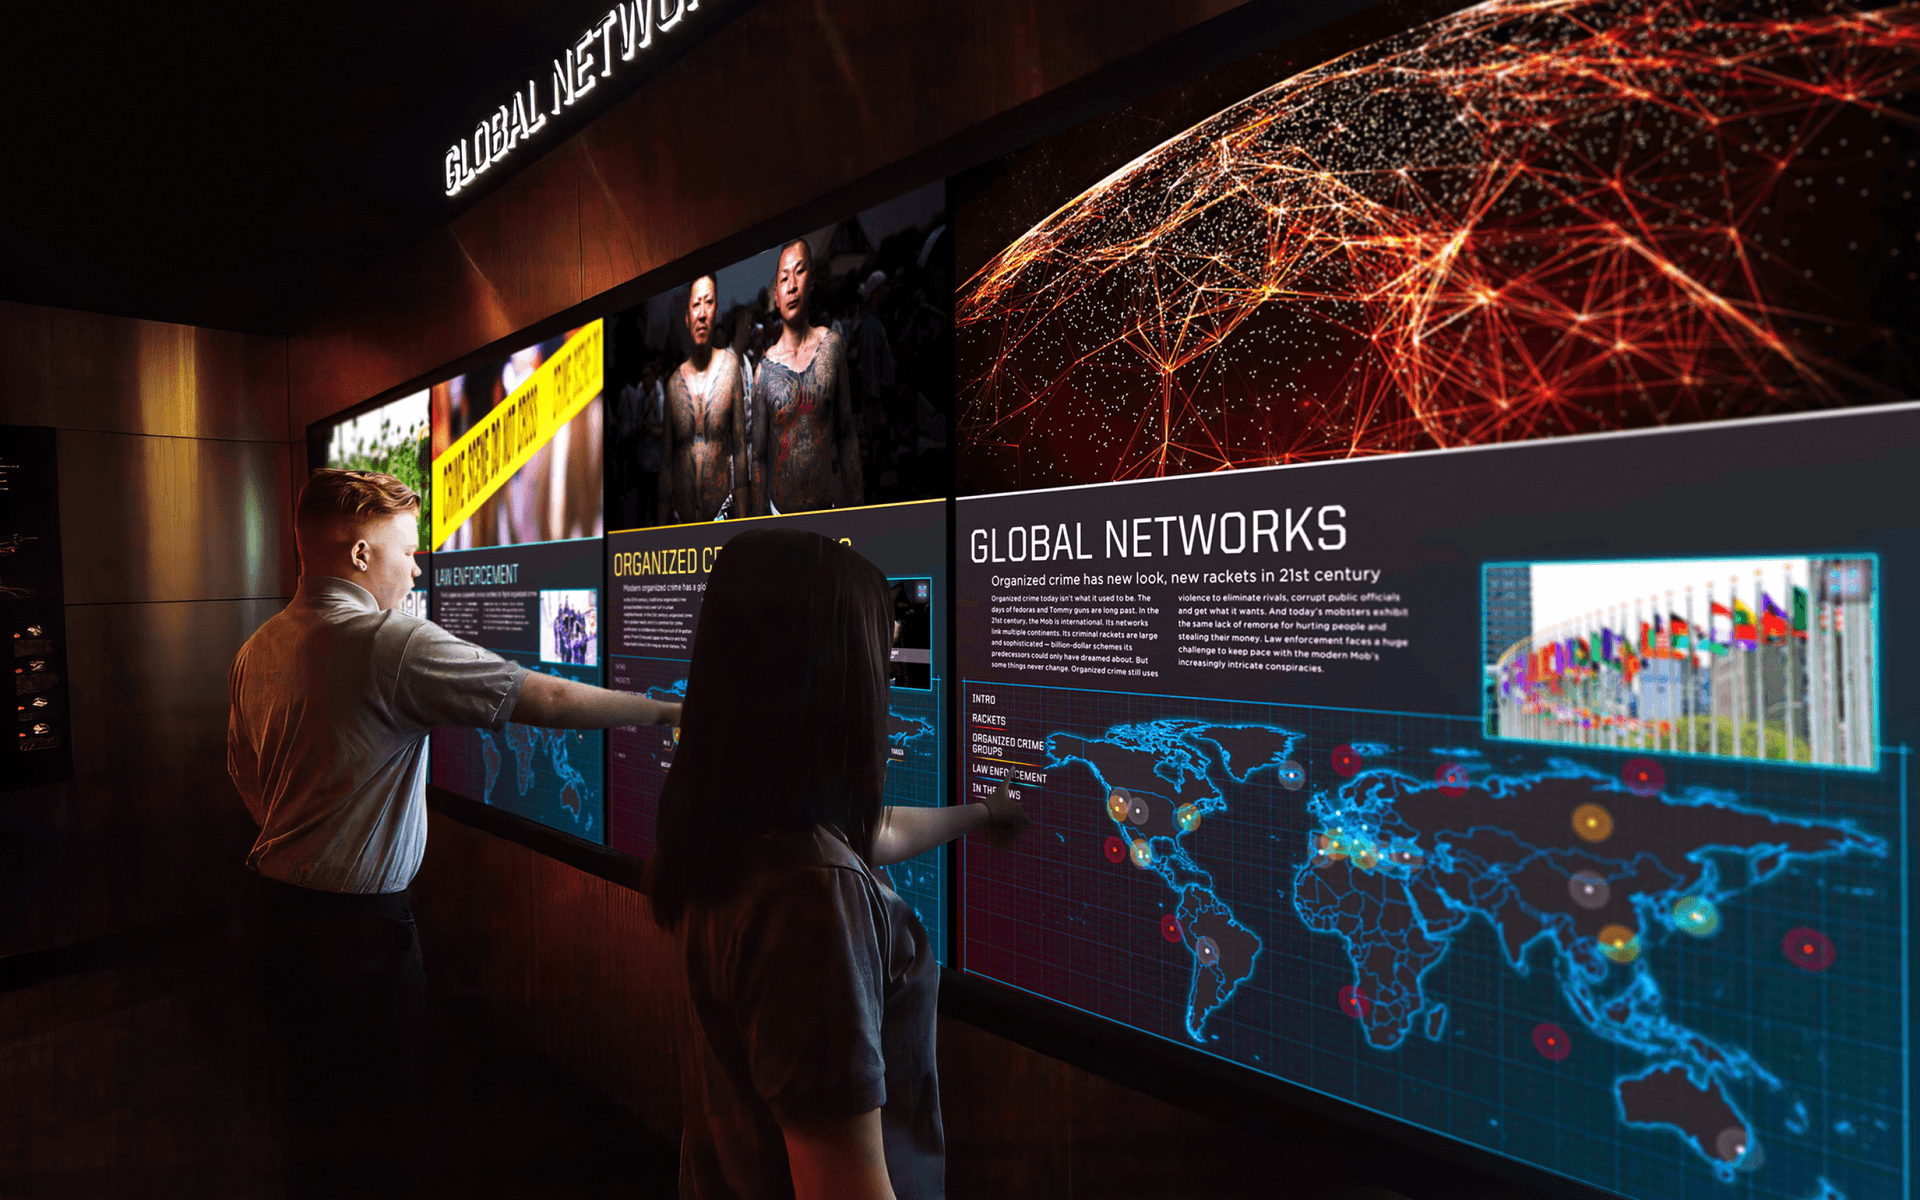 Two museum visitors stand in front of a video wall displaying information about global organized crime. Each visitor is interacting with the exhibit by touching the screen.